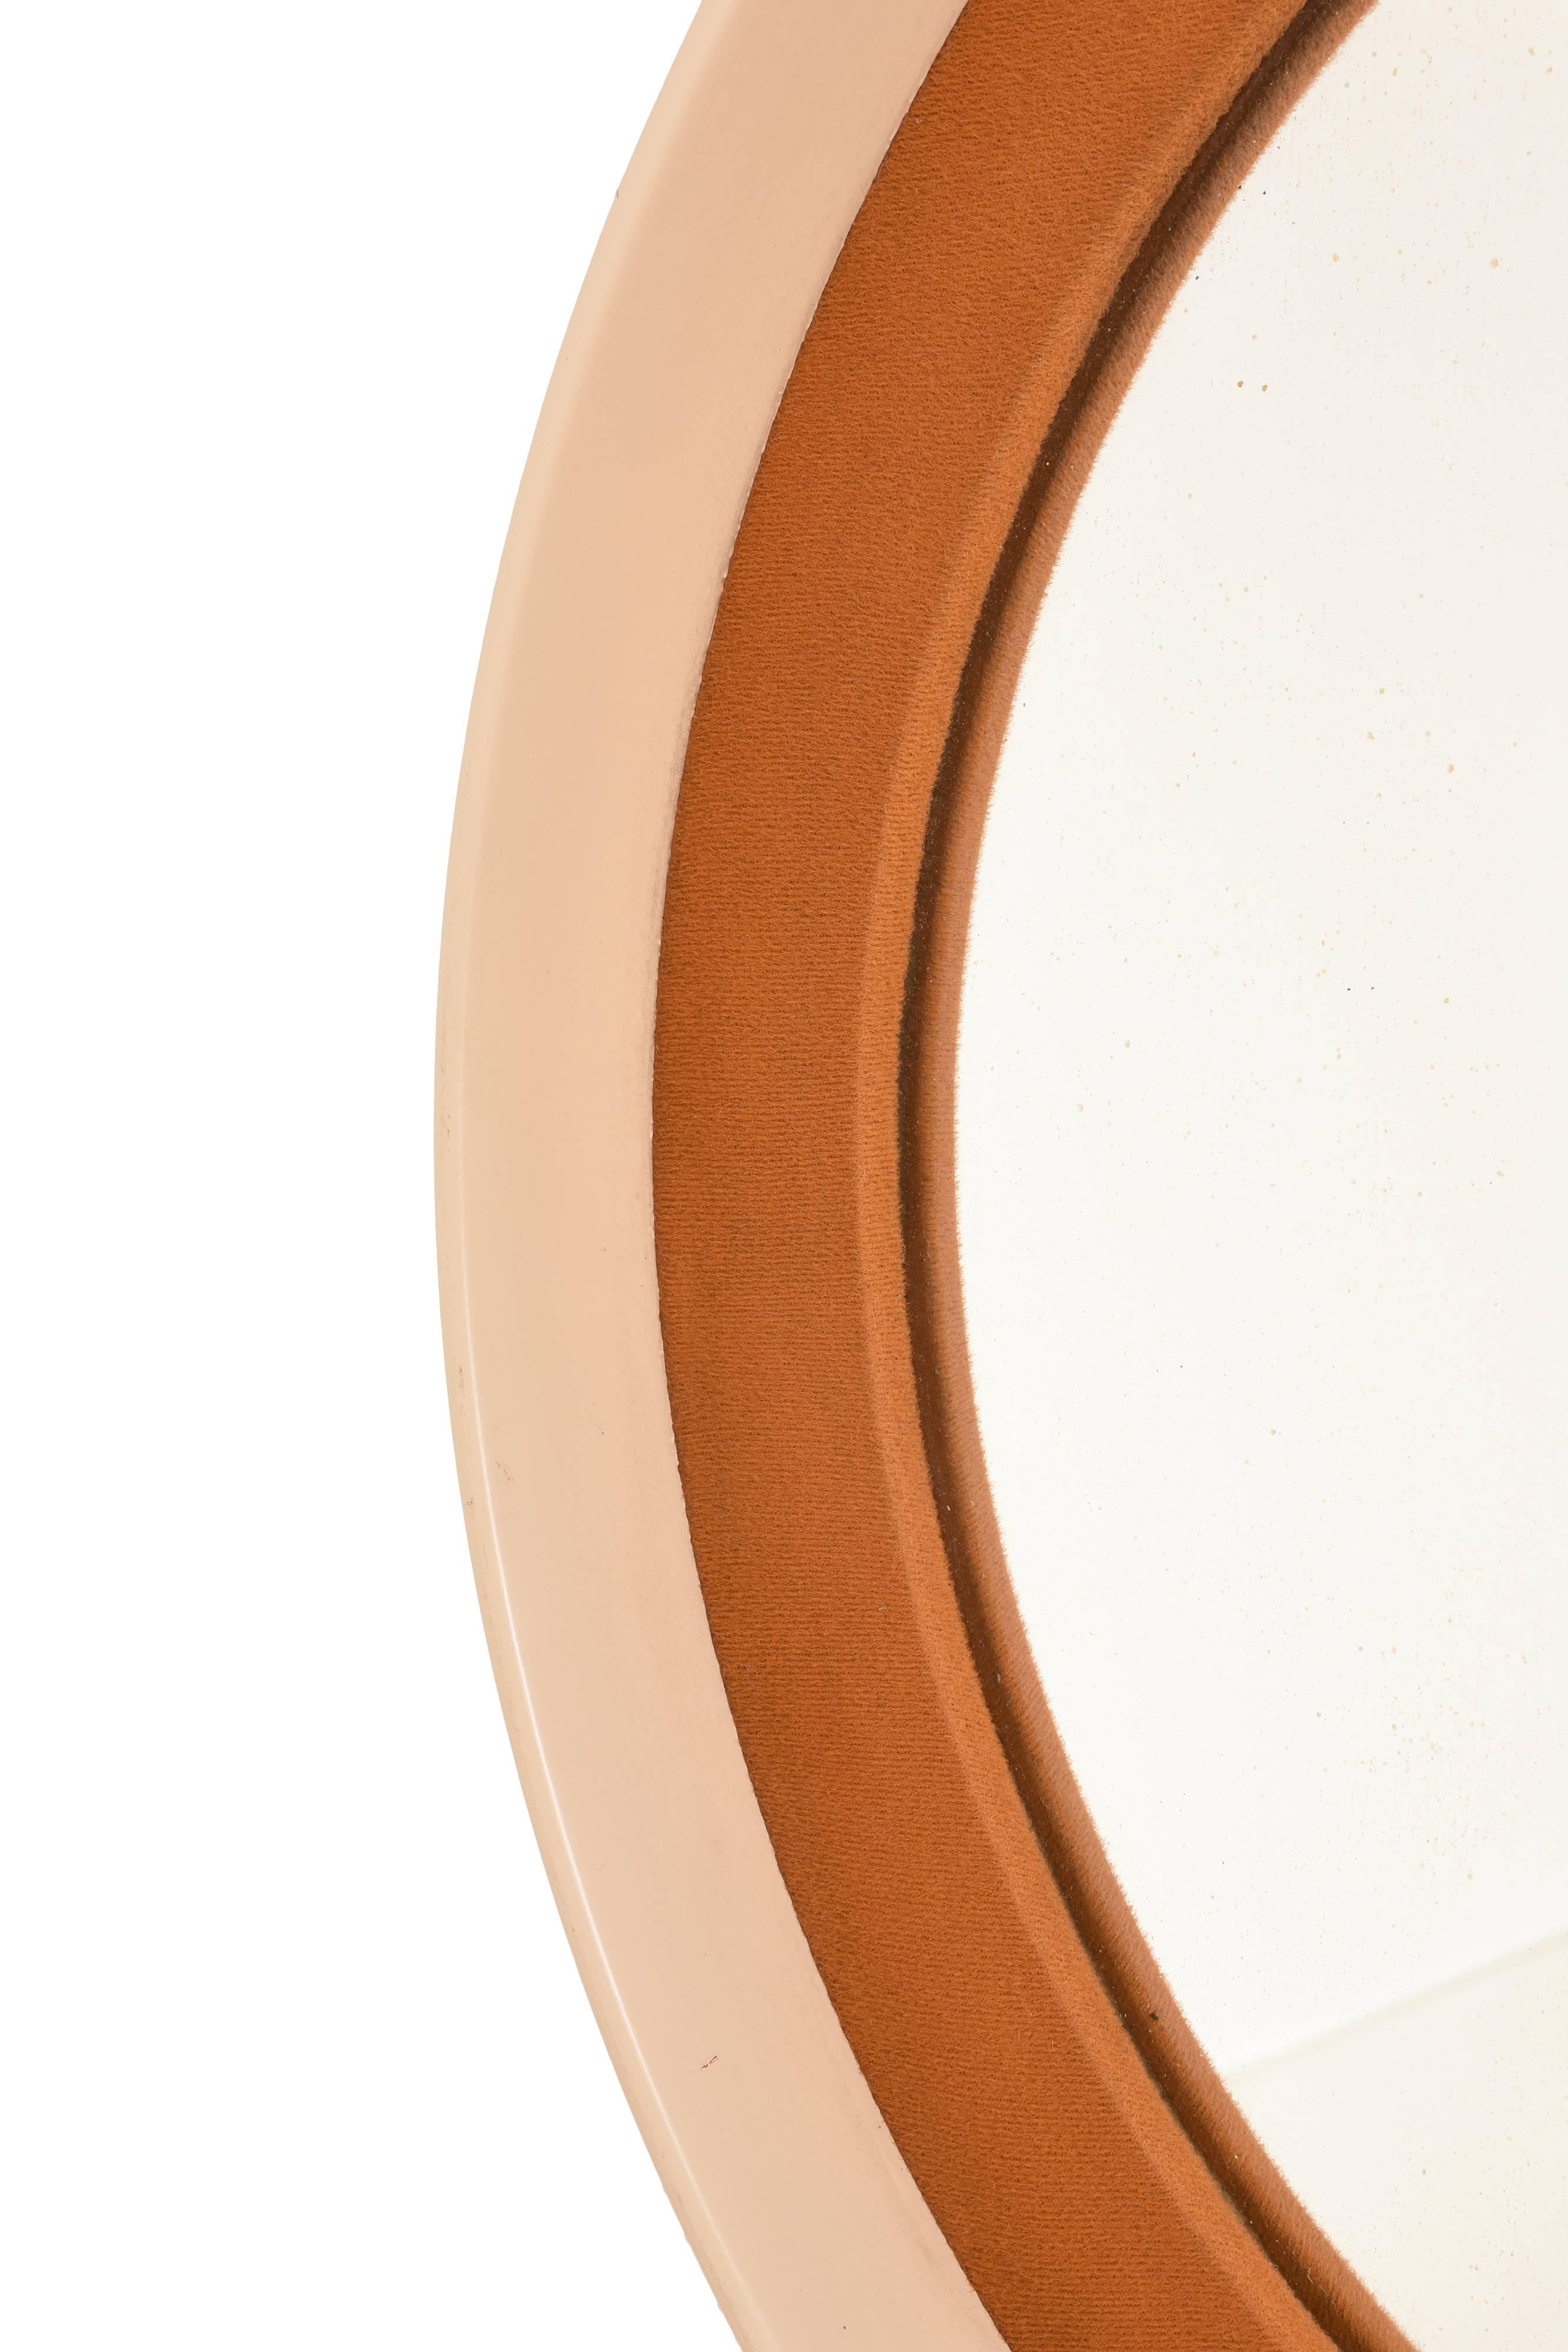 Late 20th Century Round Mirror with Frame in Lacquered Wood and Fabric, Italy, 1970s Midcentury For Sale